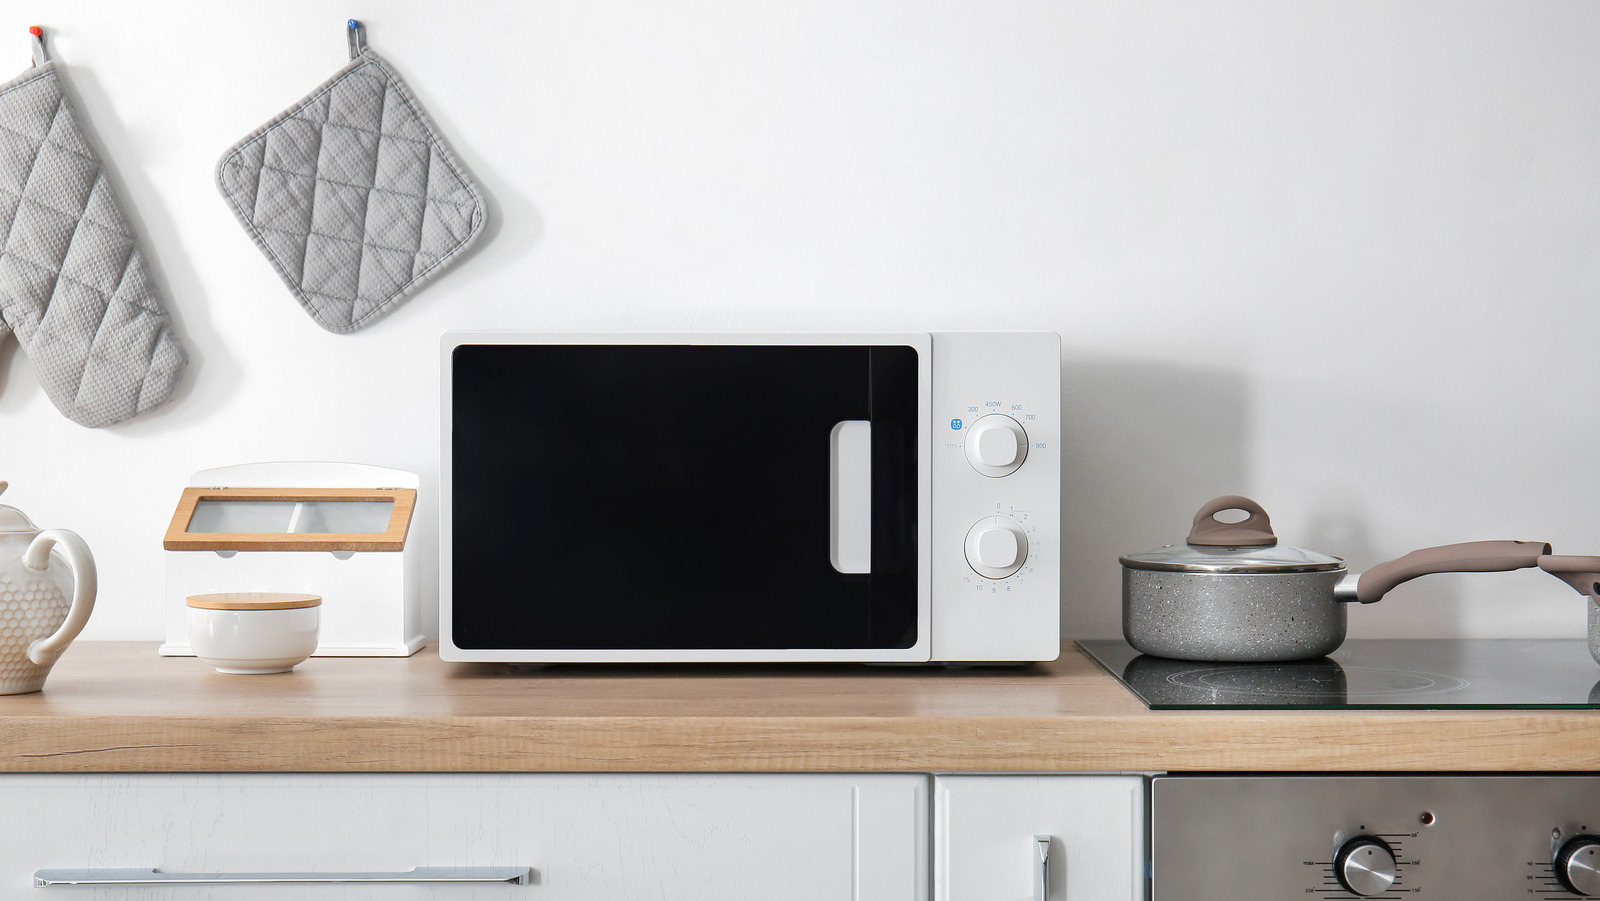 8 Best Ways To Get Rid Of Gross Smells In Your Microwave